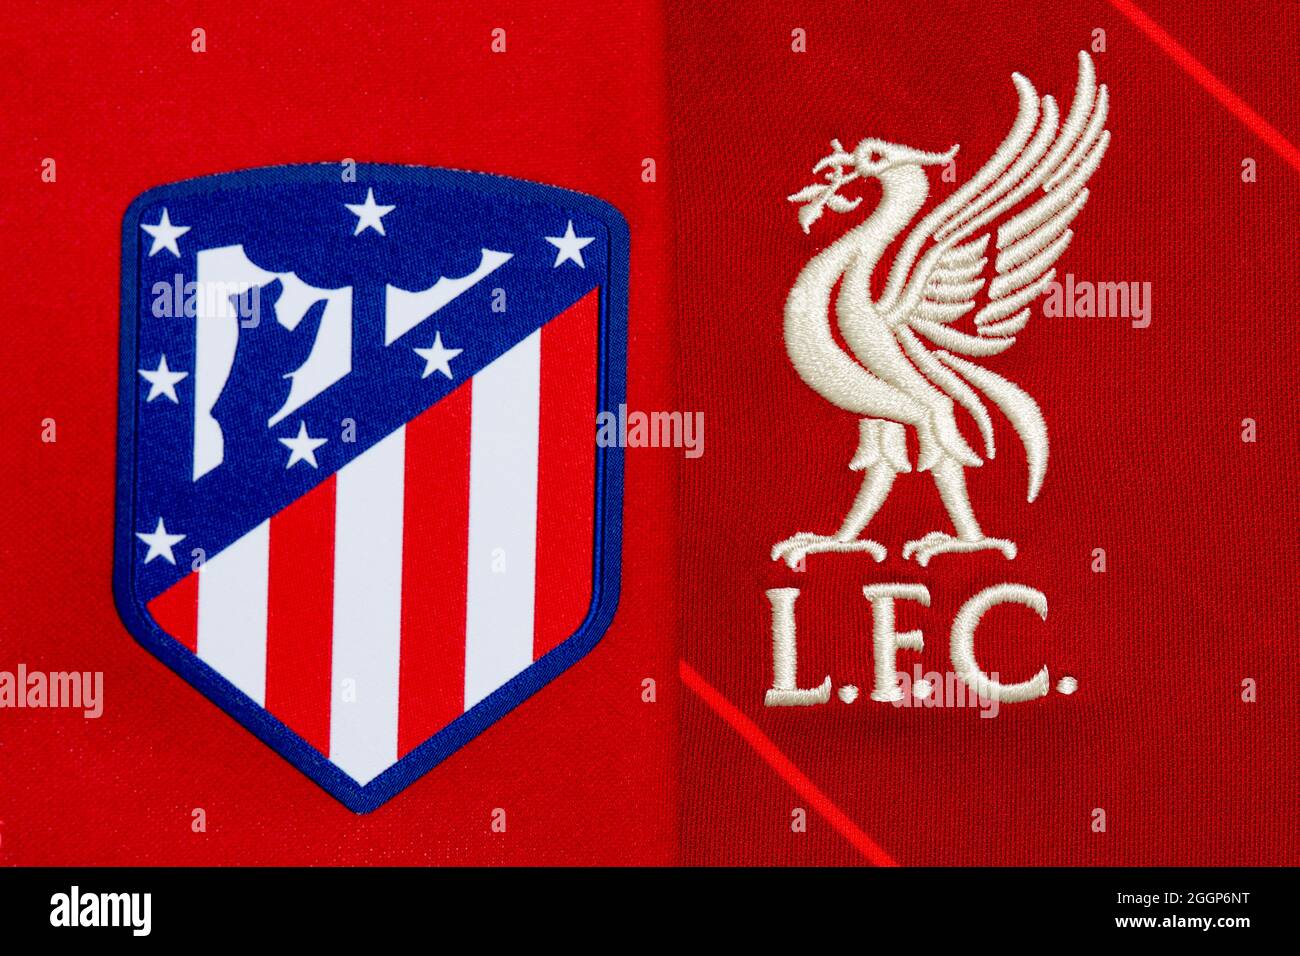 Close up of Atletico Madrid and Liverpool FC club crest. Stock Photo